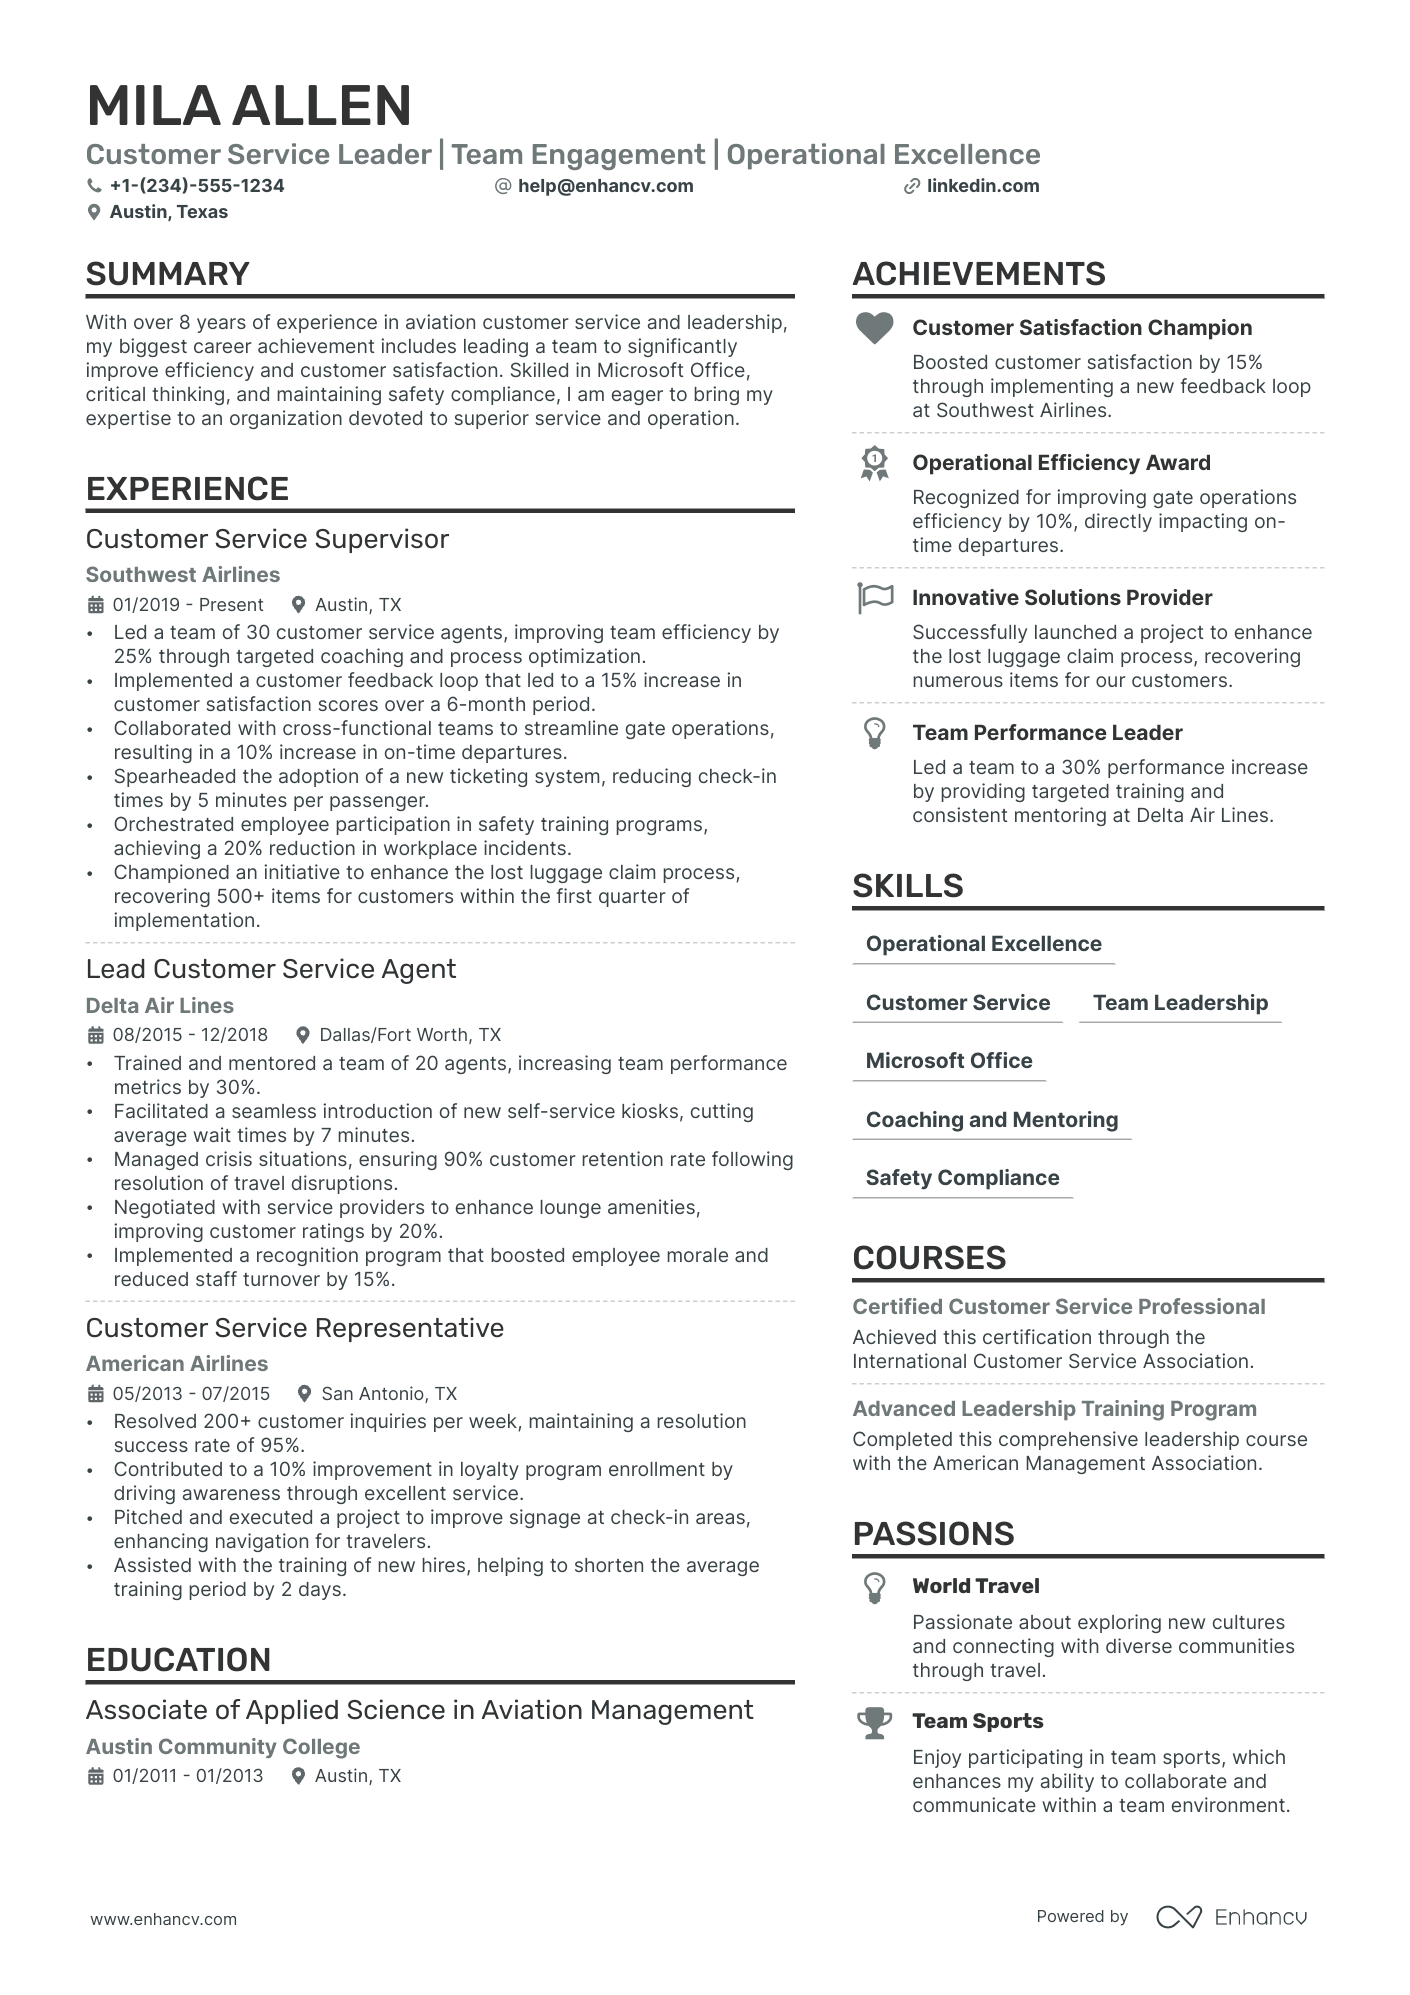 Customer Service Leader | Team Engagement | Operational Excellence resume example